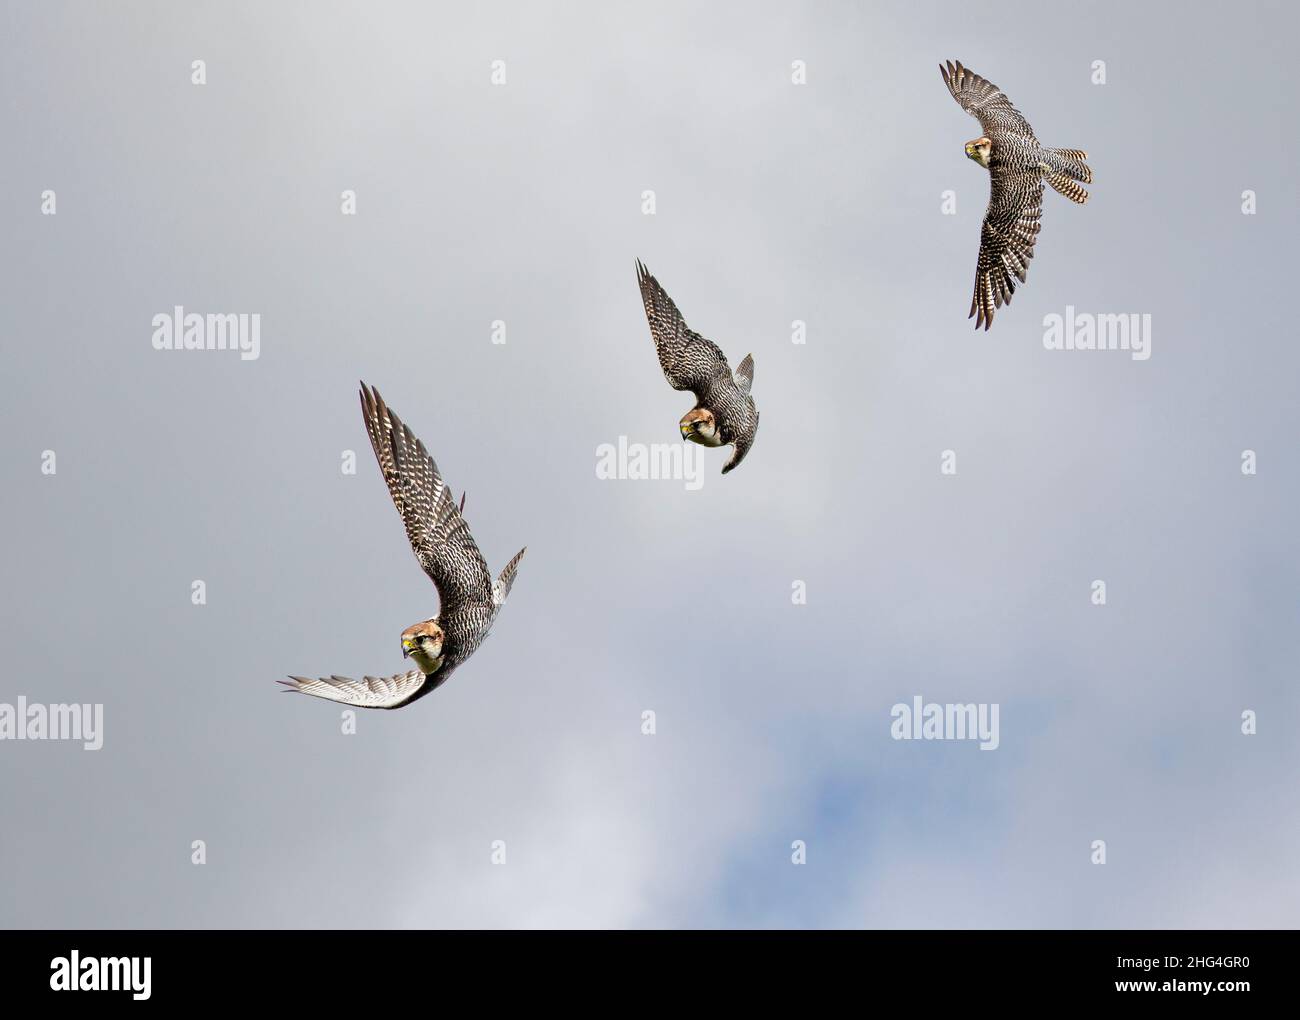 Series of shots showing a Falcon in Flight turning onto back merged into one image Stock Photo